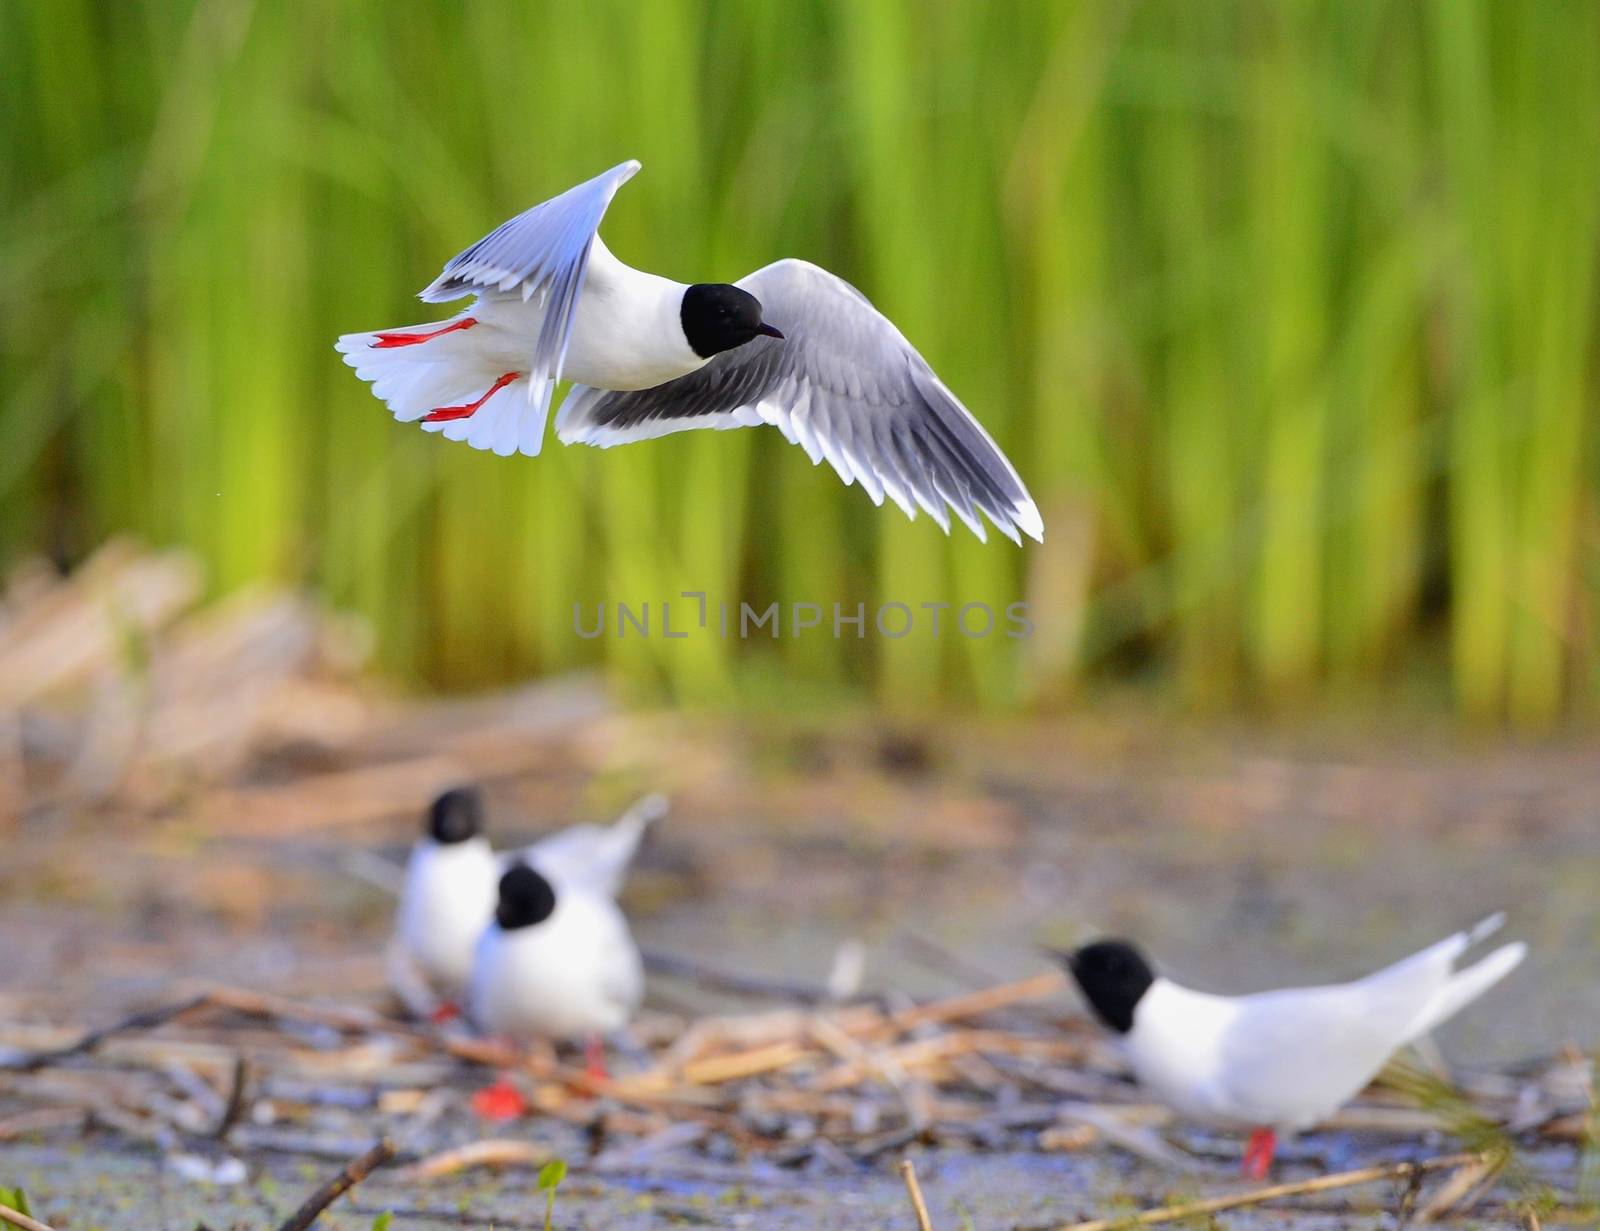 The Little Gull (Larus minutus) in flight. Little Gull, Hydrocoloeus minutus or Larus minutus, is a small gull which breeds in northern Europe and Asia.